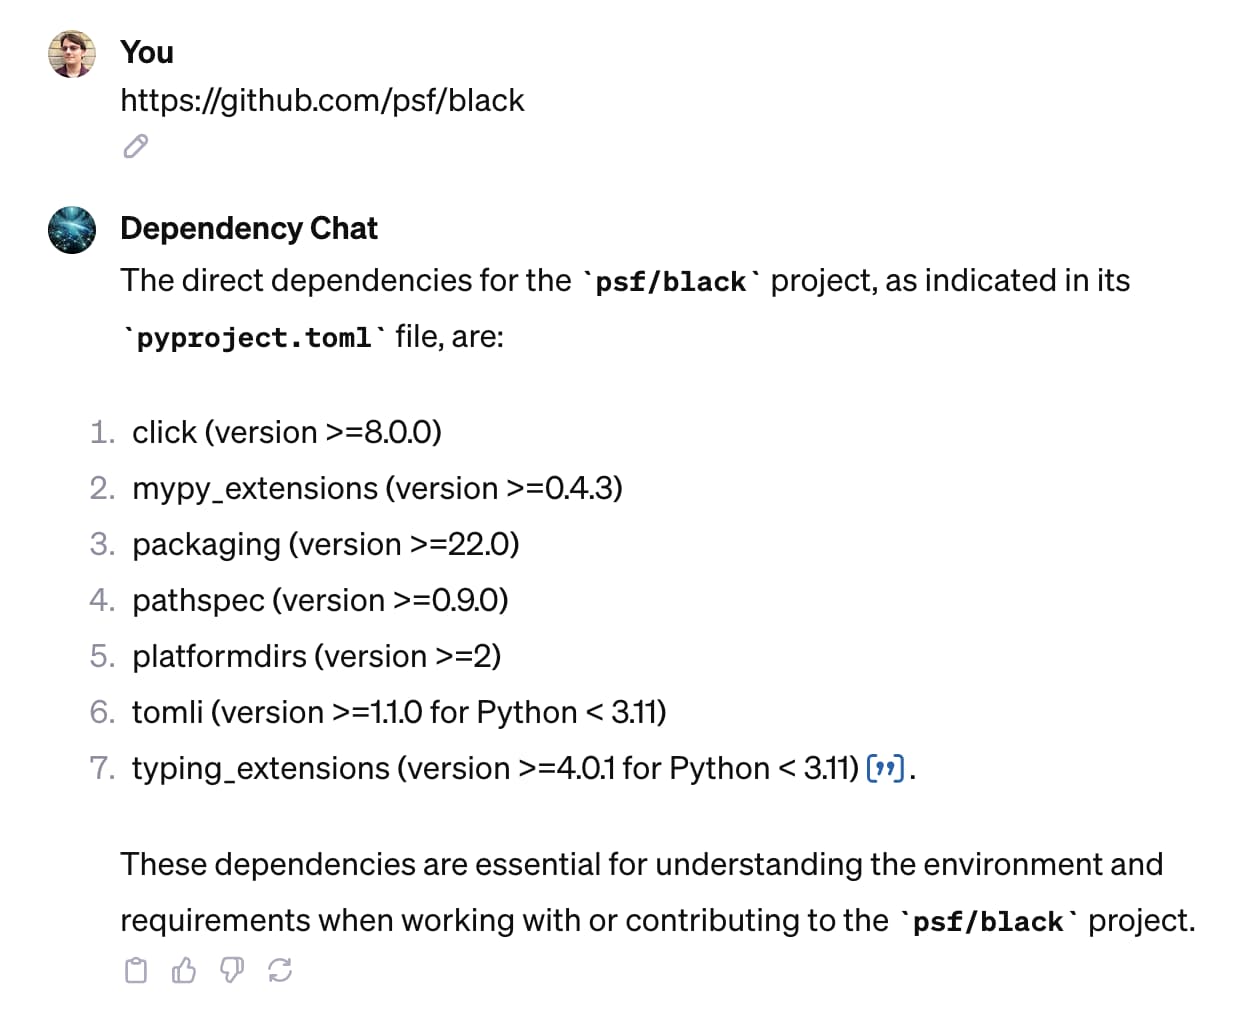 Me: github.com/psf/black - Dependency chat: The direct dependencies for the psf/black project, as indicated in its pyproject.toml file, are:      click (version  />=8.0.0)     mypy_extensions (version >=0.4.3)     packaging (version >=22.0)     pathspec (version >=0.9.0)     platformdirs (version >=2)     tomli (version >=1.1.0 for Python < 3.11)     typing_extensions (version >=4.0.1 for Python < 3.11)​      ​.  These dependencies are essential for understanding the environment and requirements when working with or contributing to the psf/black project.